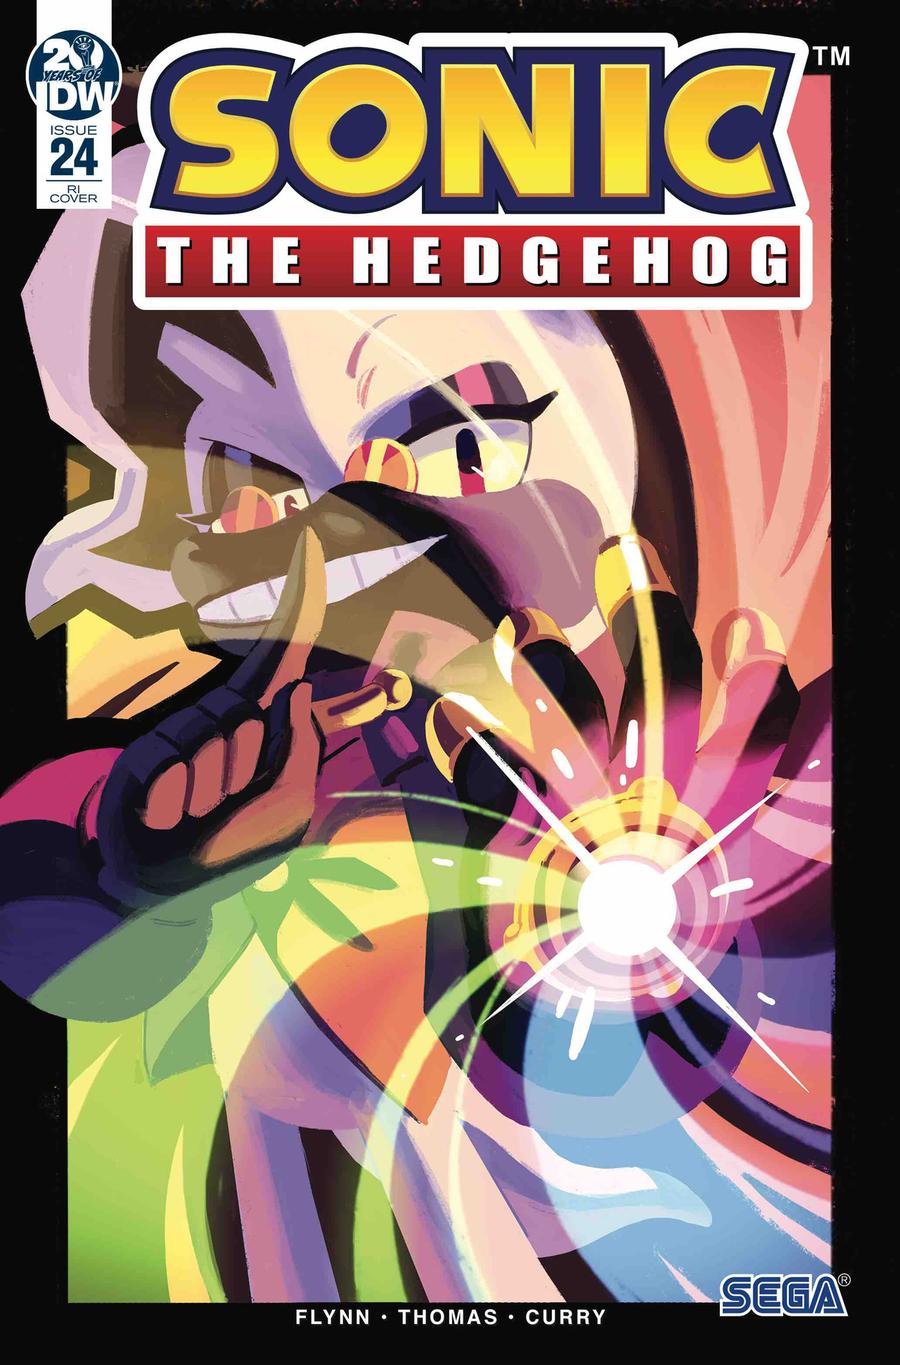 Sonic The Hedgehog Vol 3 #24 Cover C Incentive Nathalie Fourdraine Variant Cover